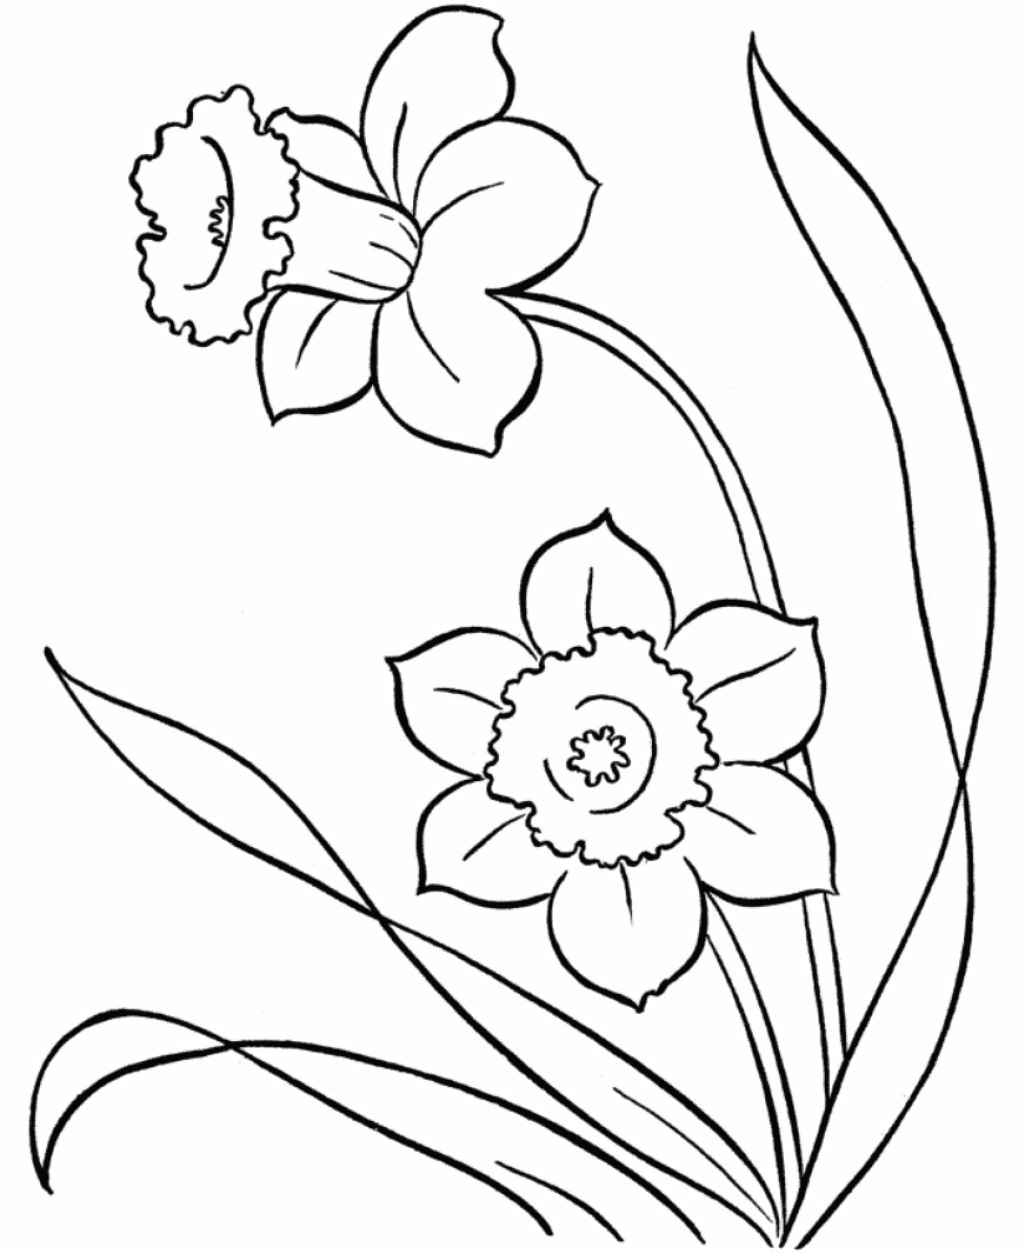 Drawing Of Spring Flowers Line Drawings Of Snowdrops Google Search Flower Outlines